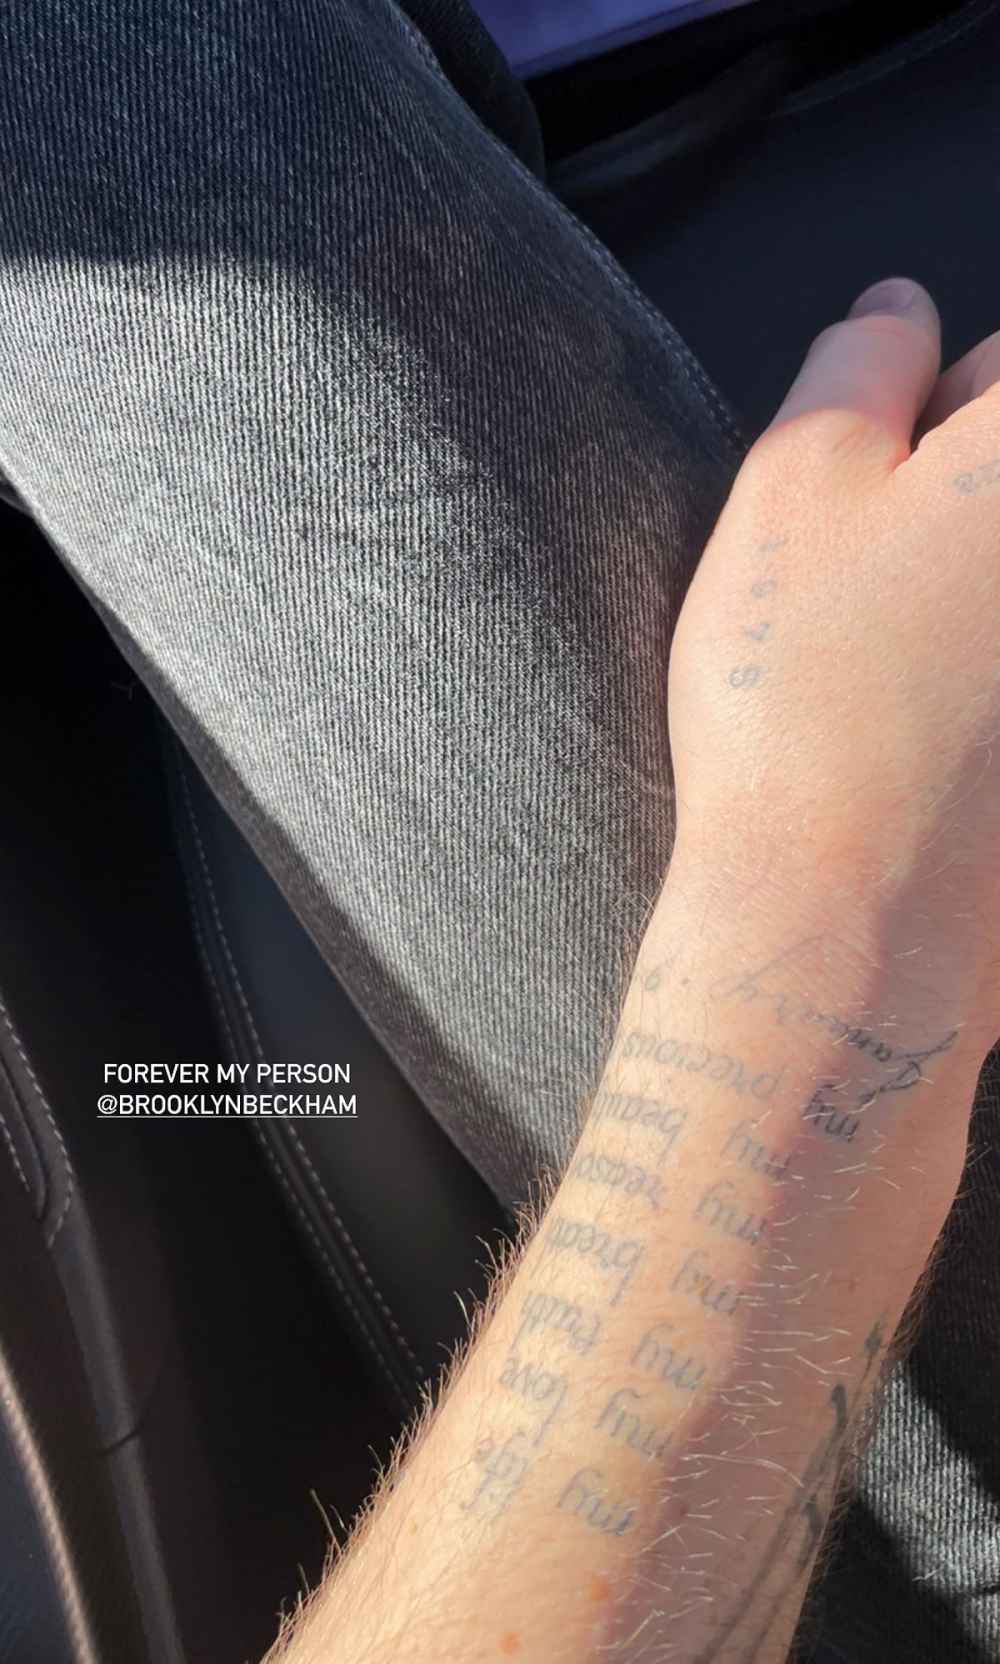 Brooklyn Beckham Debuts Yet Another Tattoo for His Fiancee Nicola Peltz